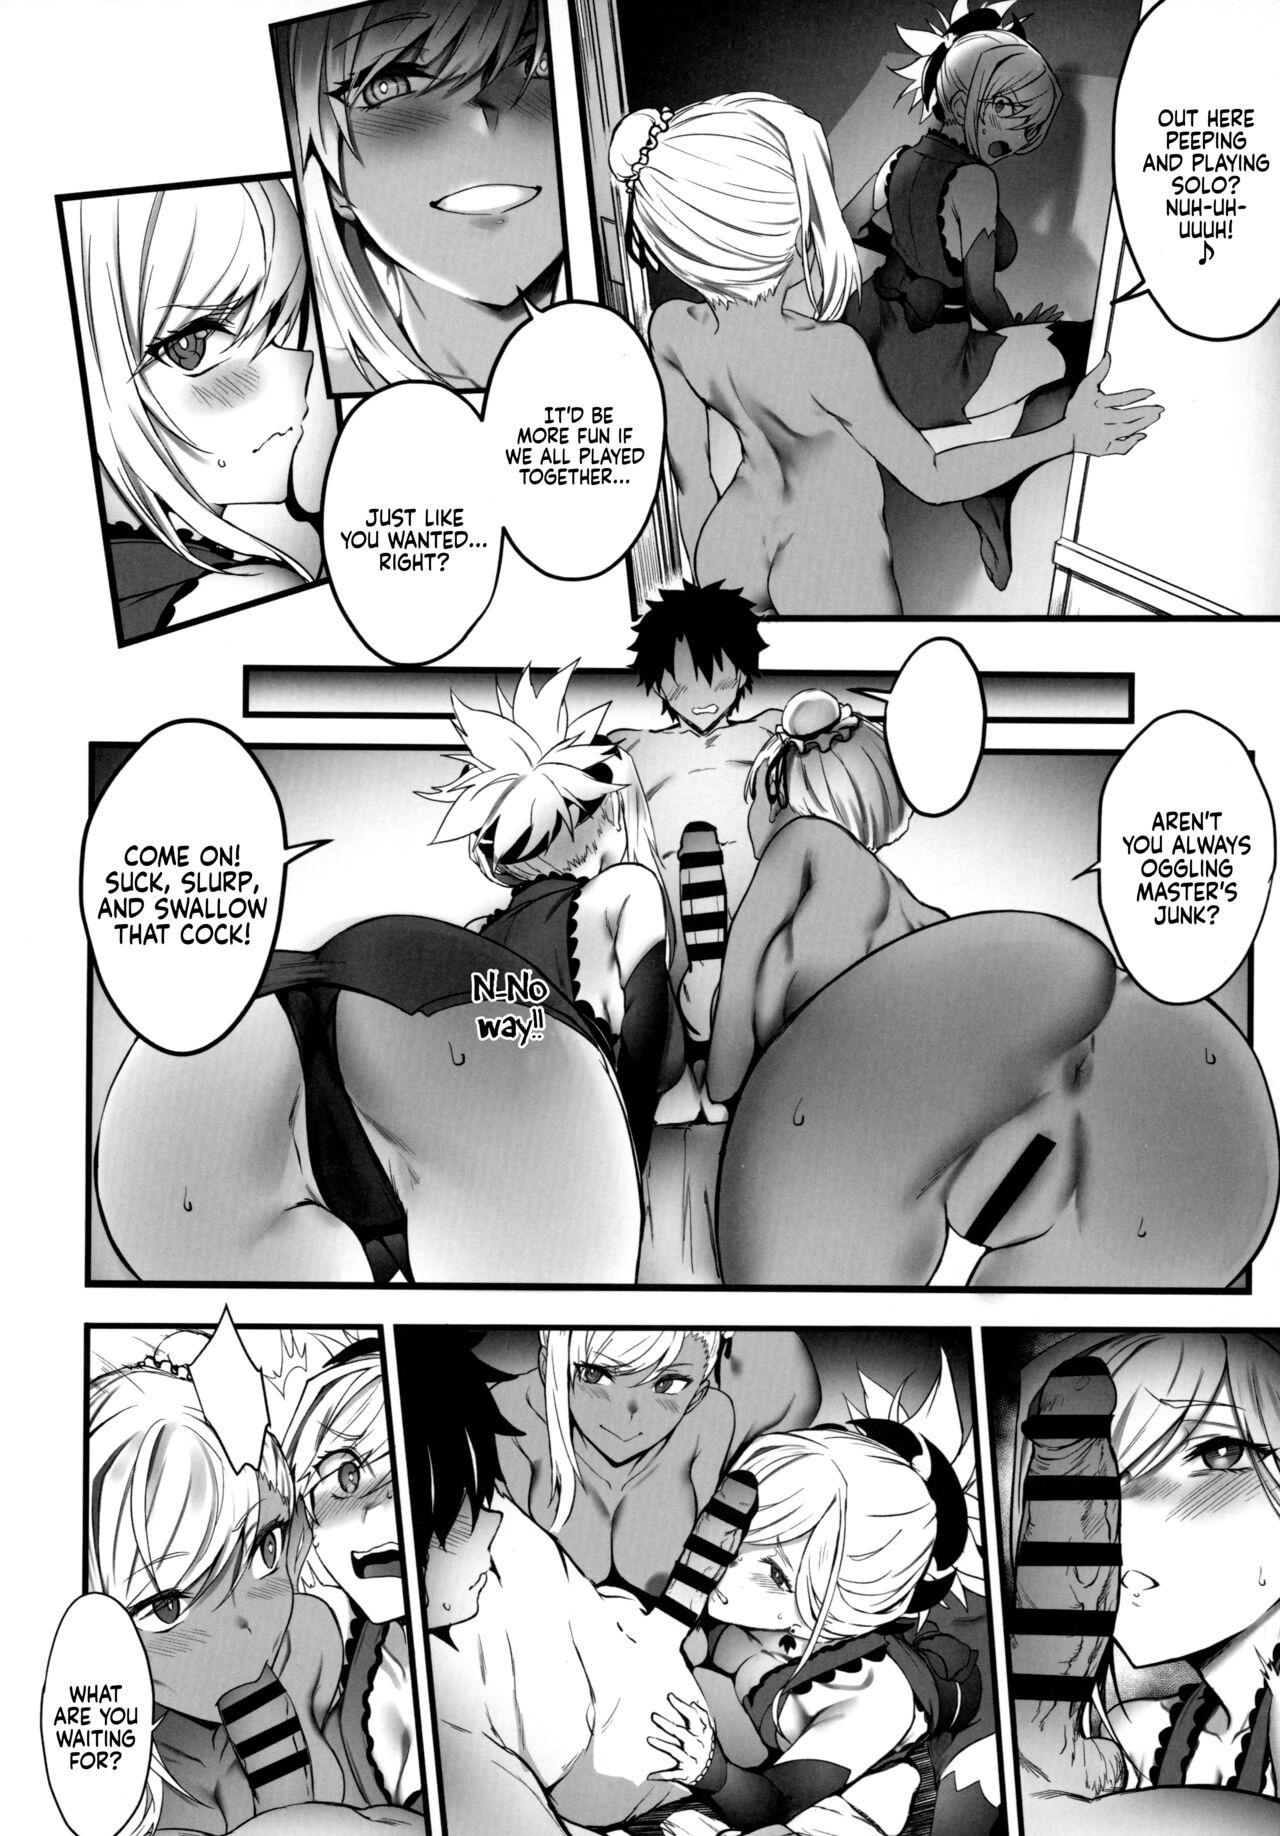 Tranny Sex Master no Benki wa kono Musashi | Master’s Cumdump is the One and Only Musashi - Fate grand order Family Sex - Page 12